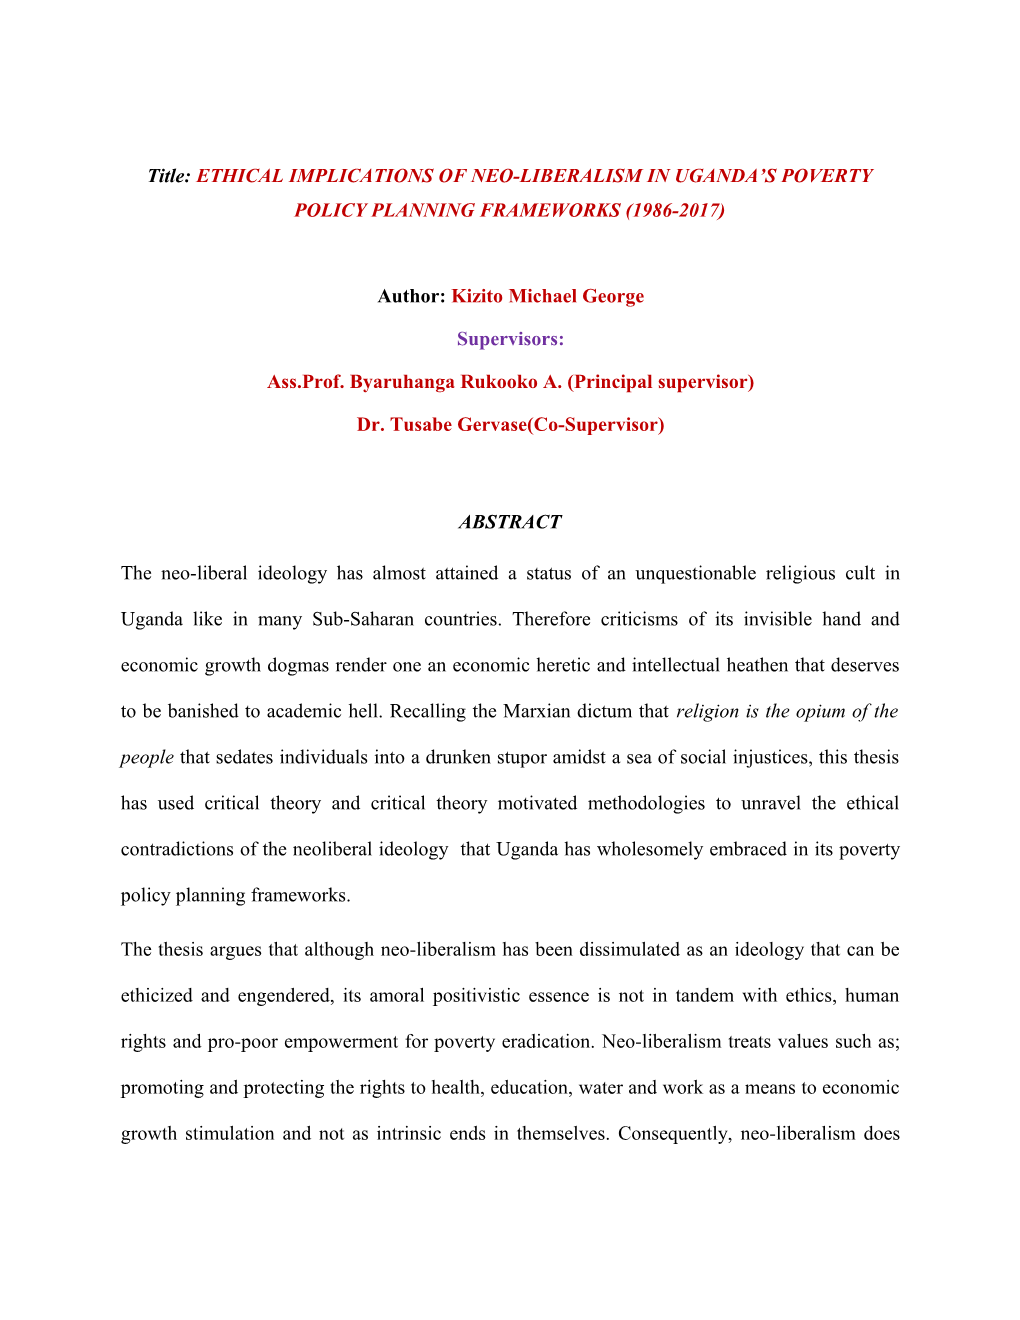 Title:ETHICAL IMPLICATIONS of NEO-LIBERALISM in UGANDA S POVERTY POLICY PLANNING FRAMEWORKS